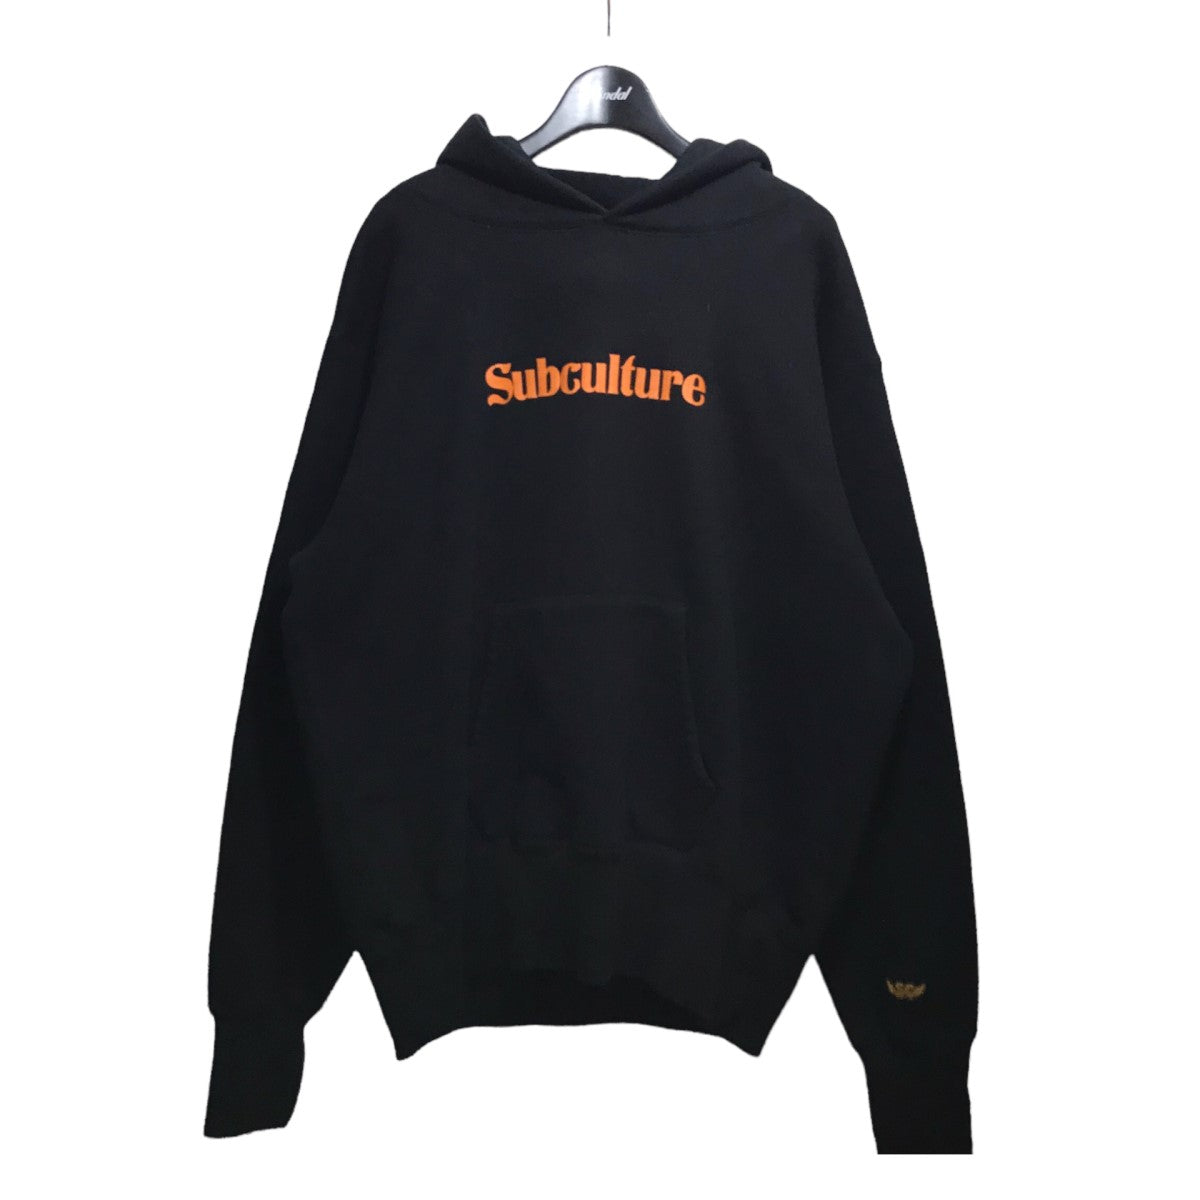 Subculture EAGLE SKULL HOODIE 新品未使用 - パーカー